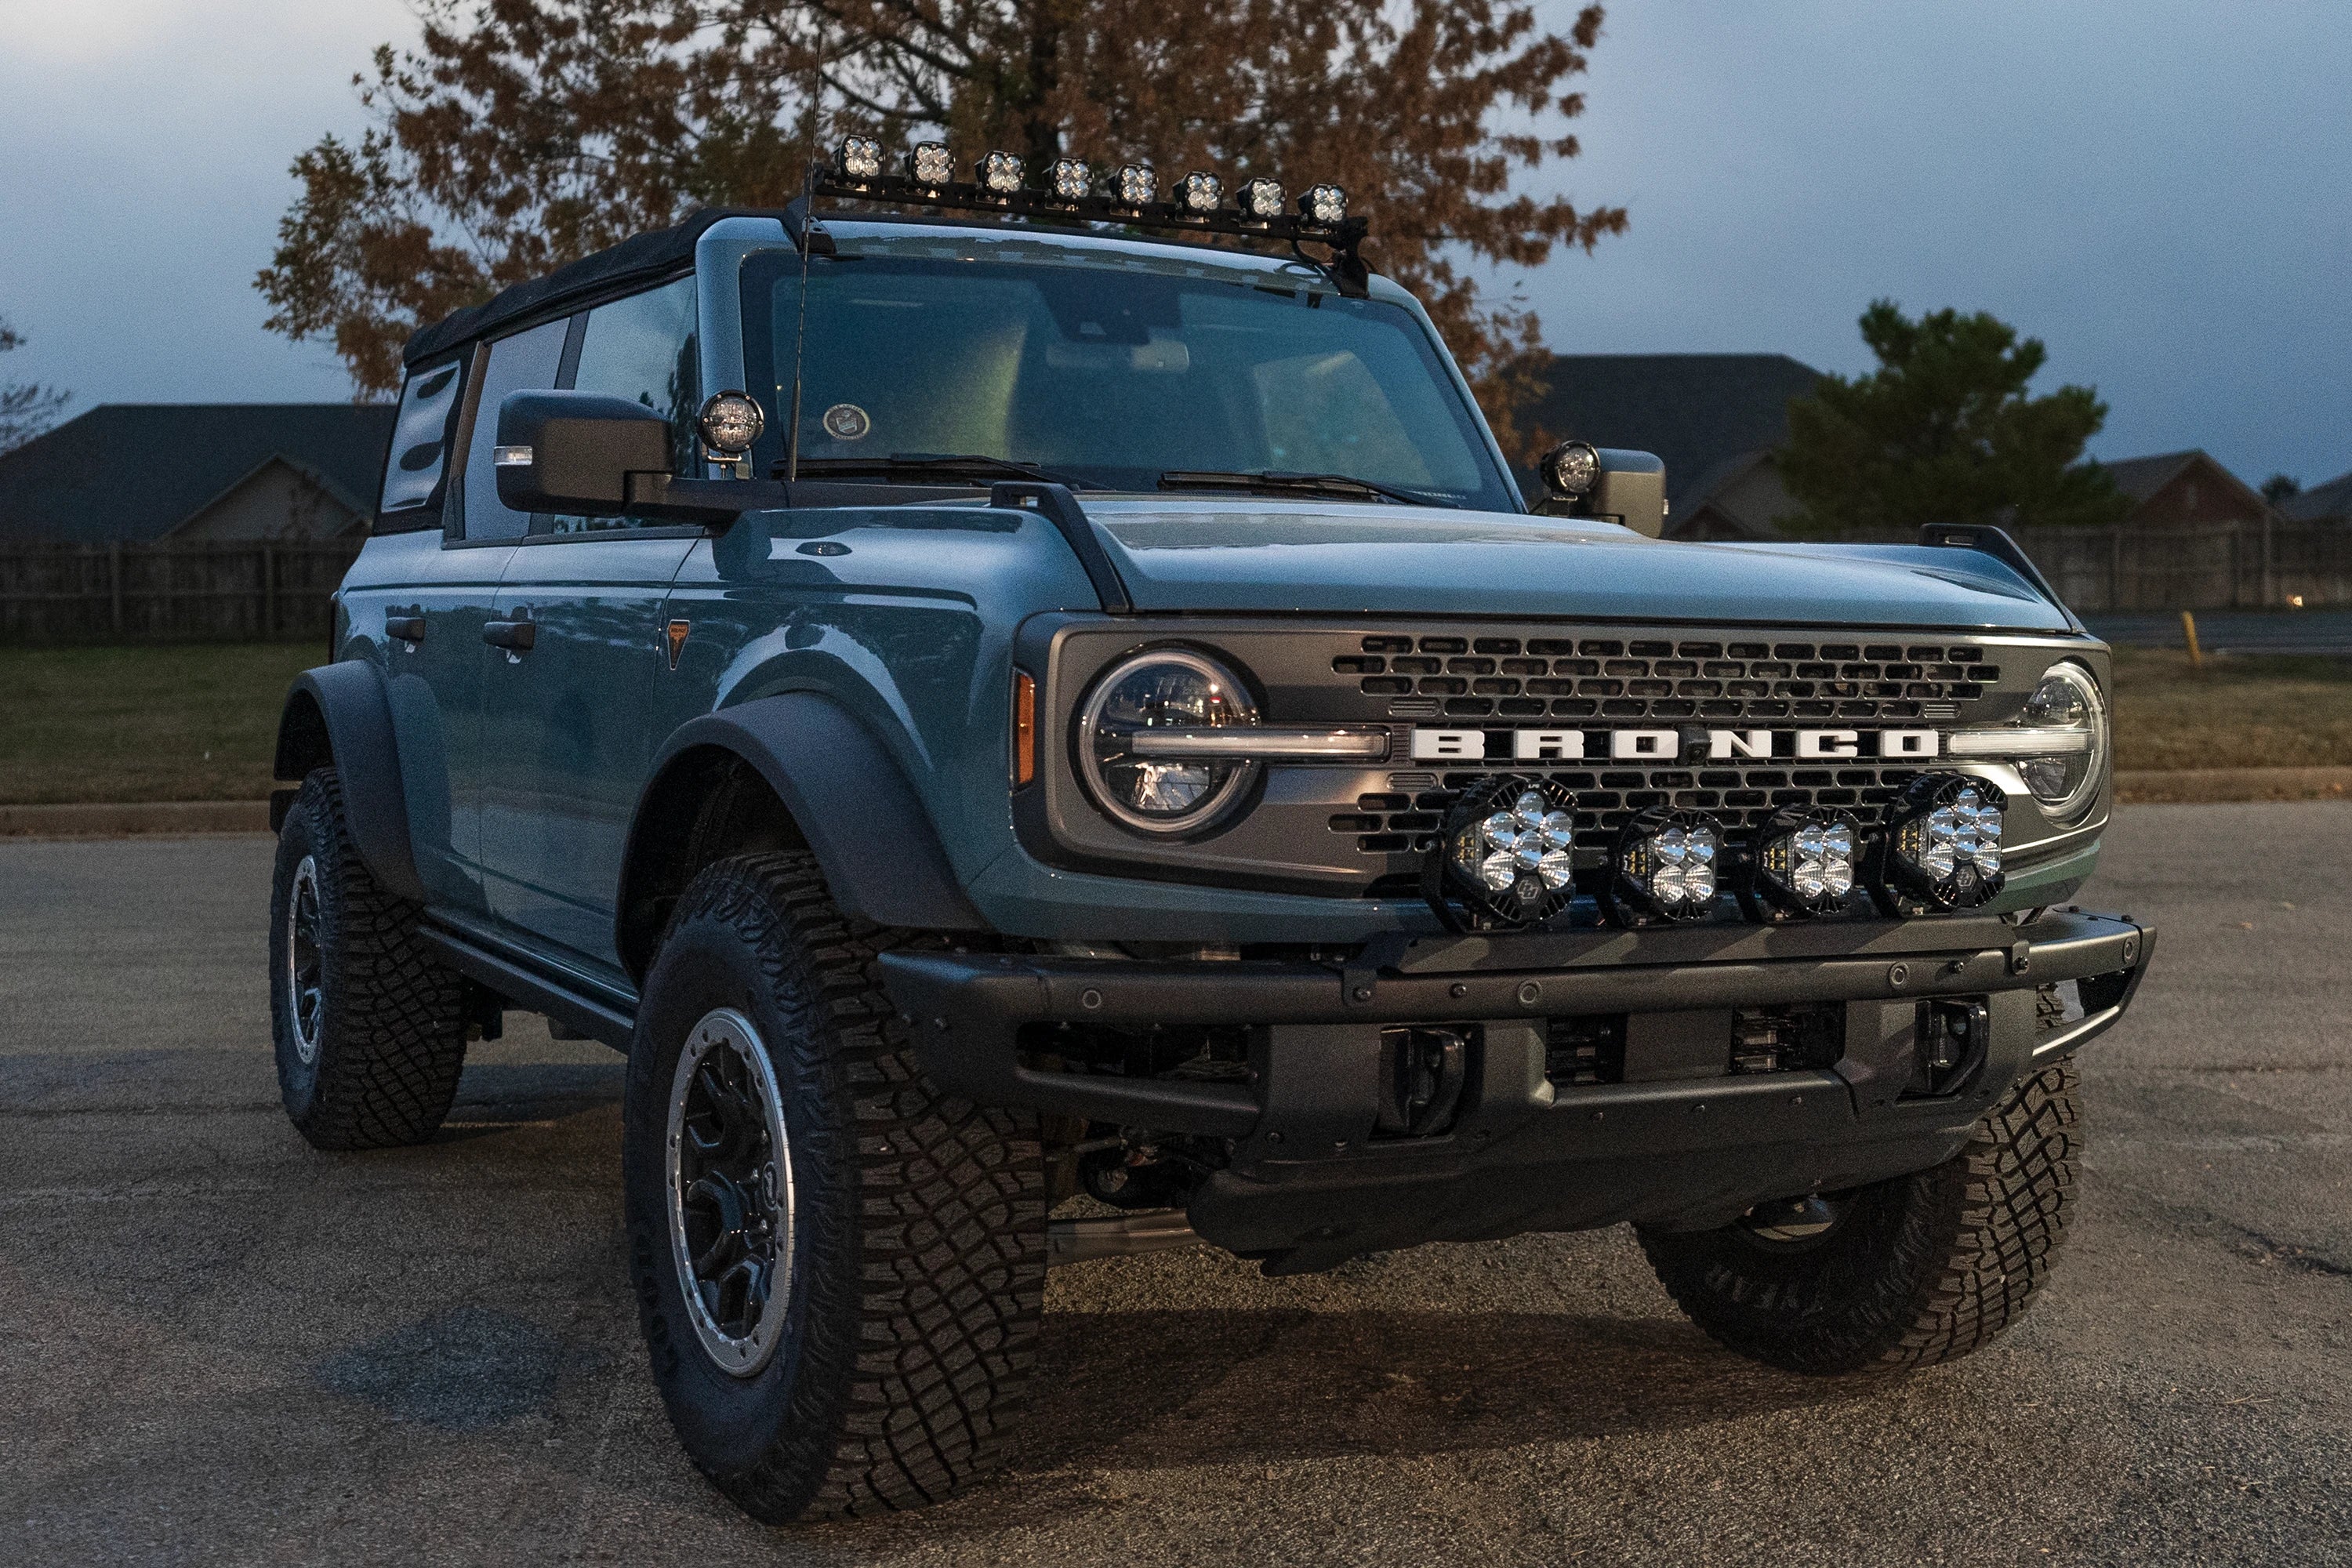 Ford Bronco Roof Line HIGH Mounts - Direct Replacement for Rigid 46723 SR Kit (Brackets Only)